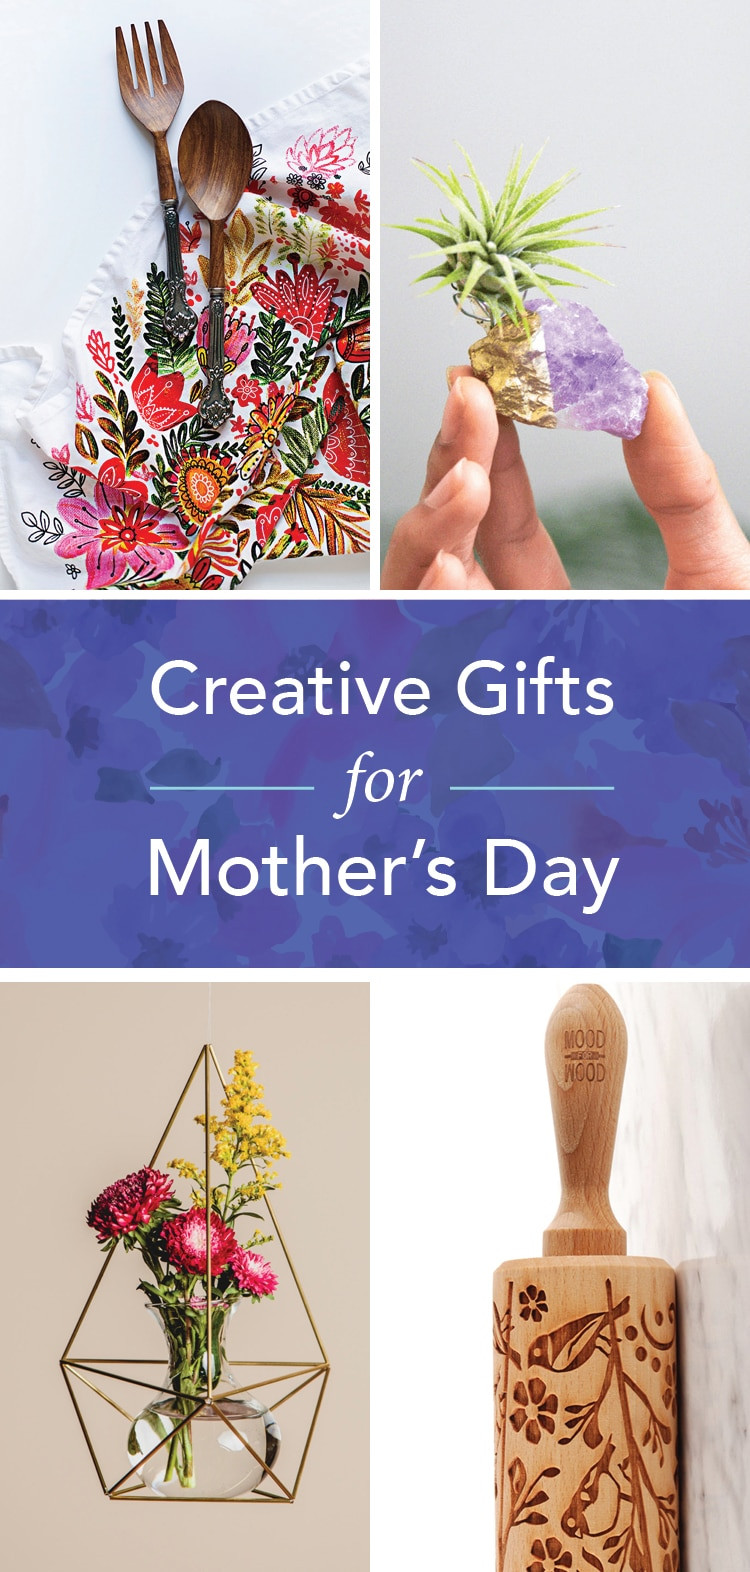 Creative Mother's Day Gifts
 20 Creative Mother s Day Gifts for the Greatest Woman in